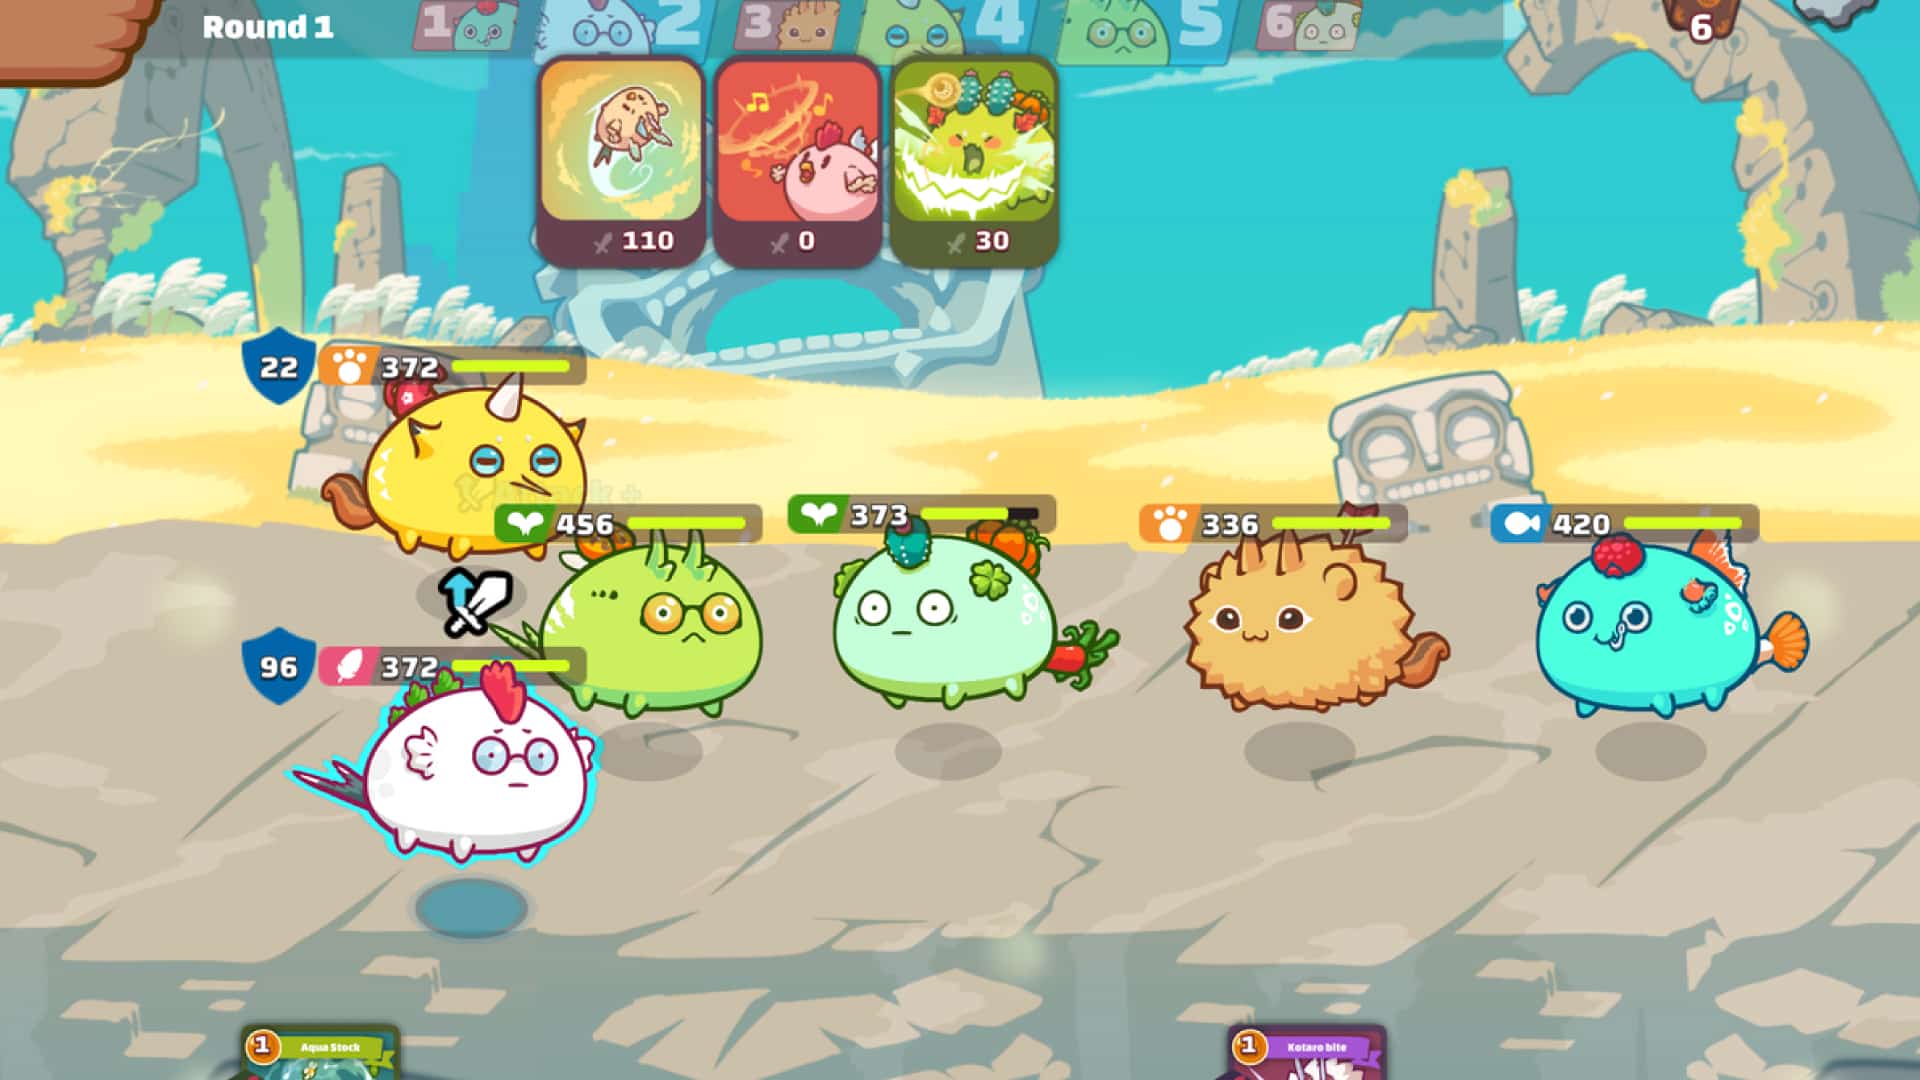 Axie Infinity game has been hacked